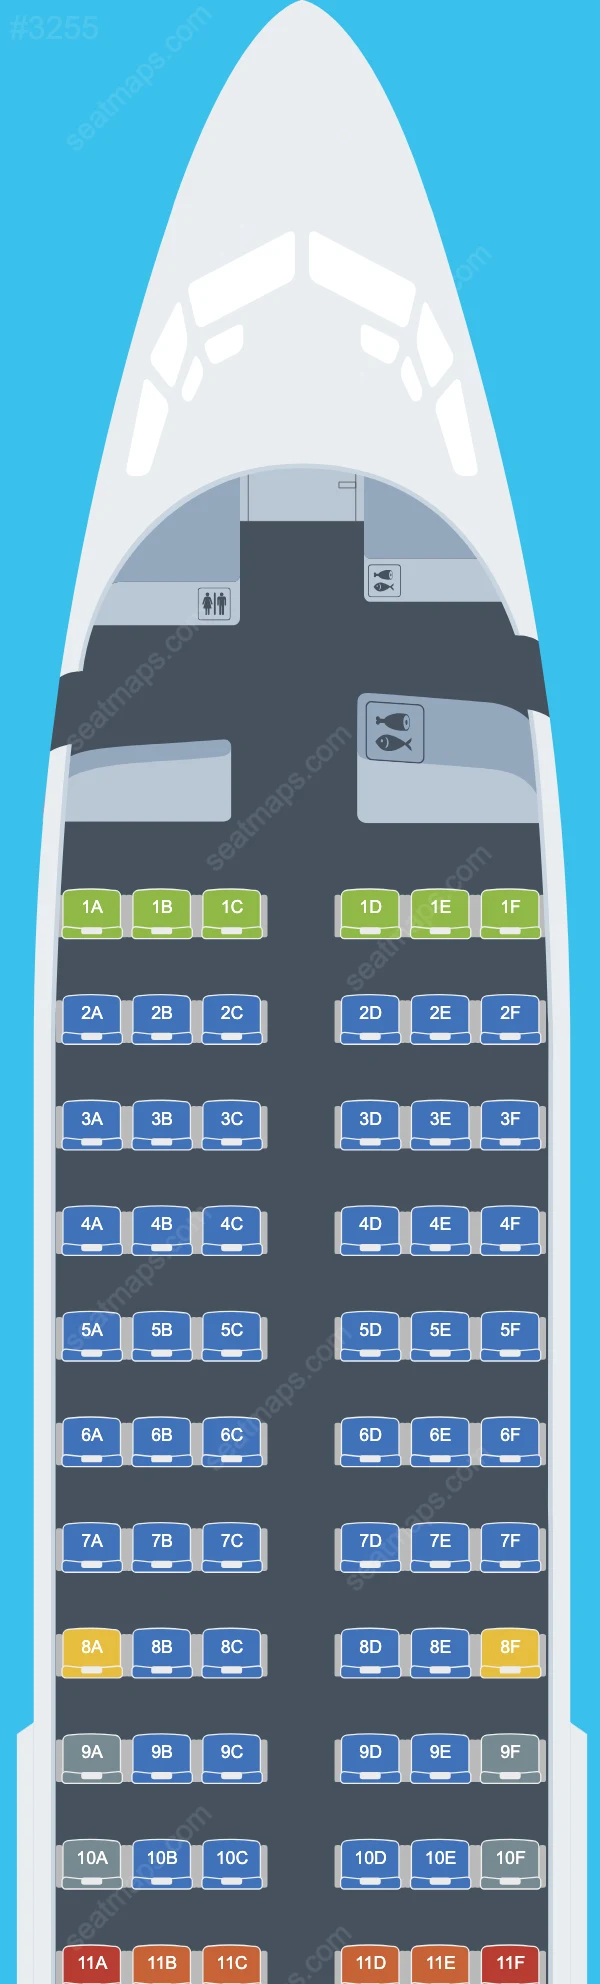 Smartwings Boeing 737 Seat Maps 737-700